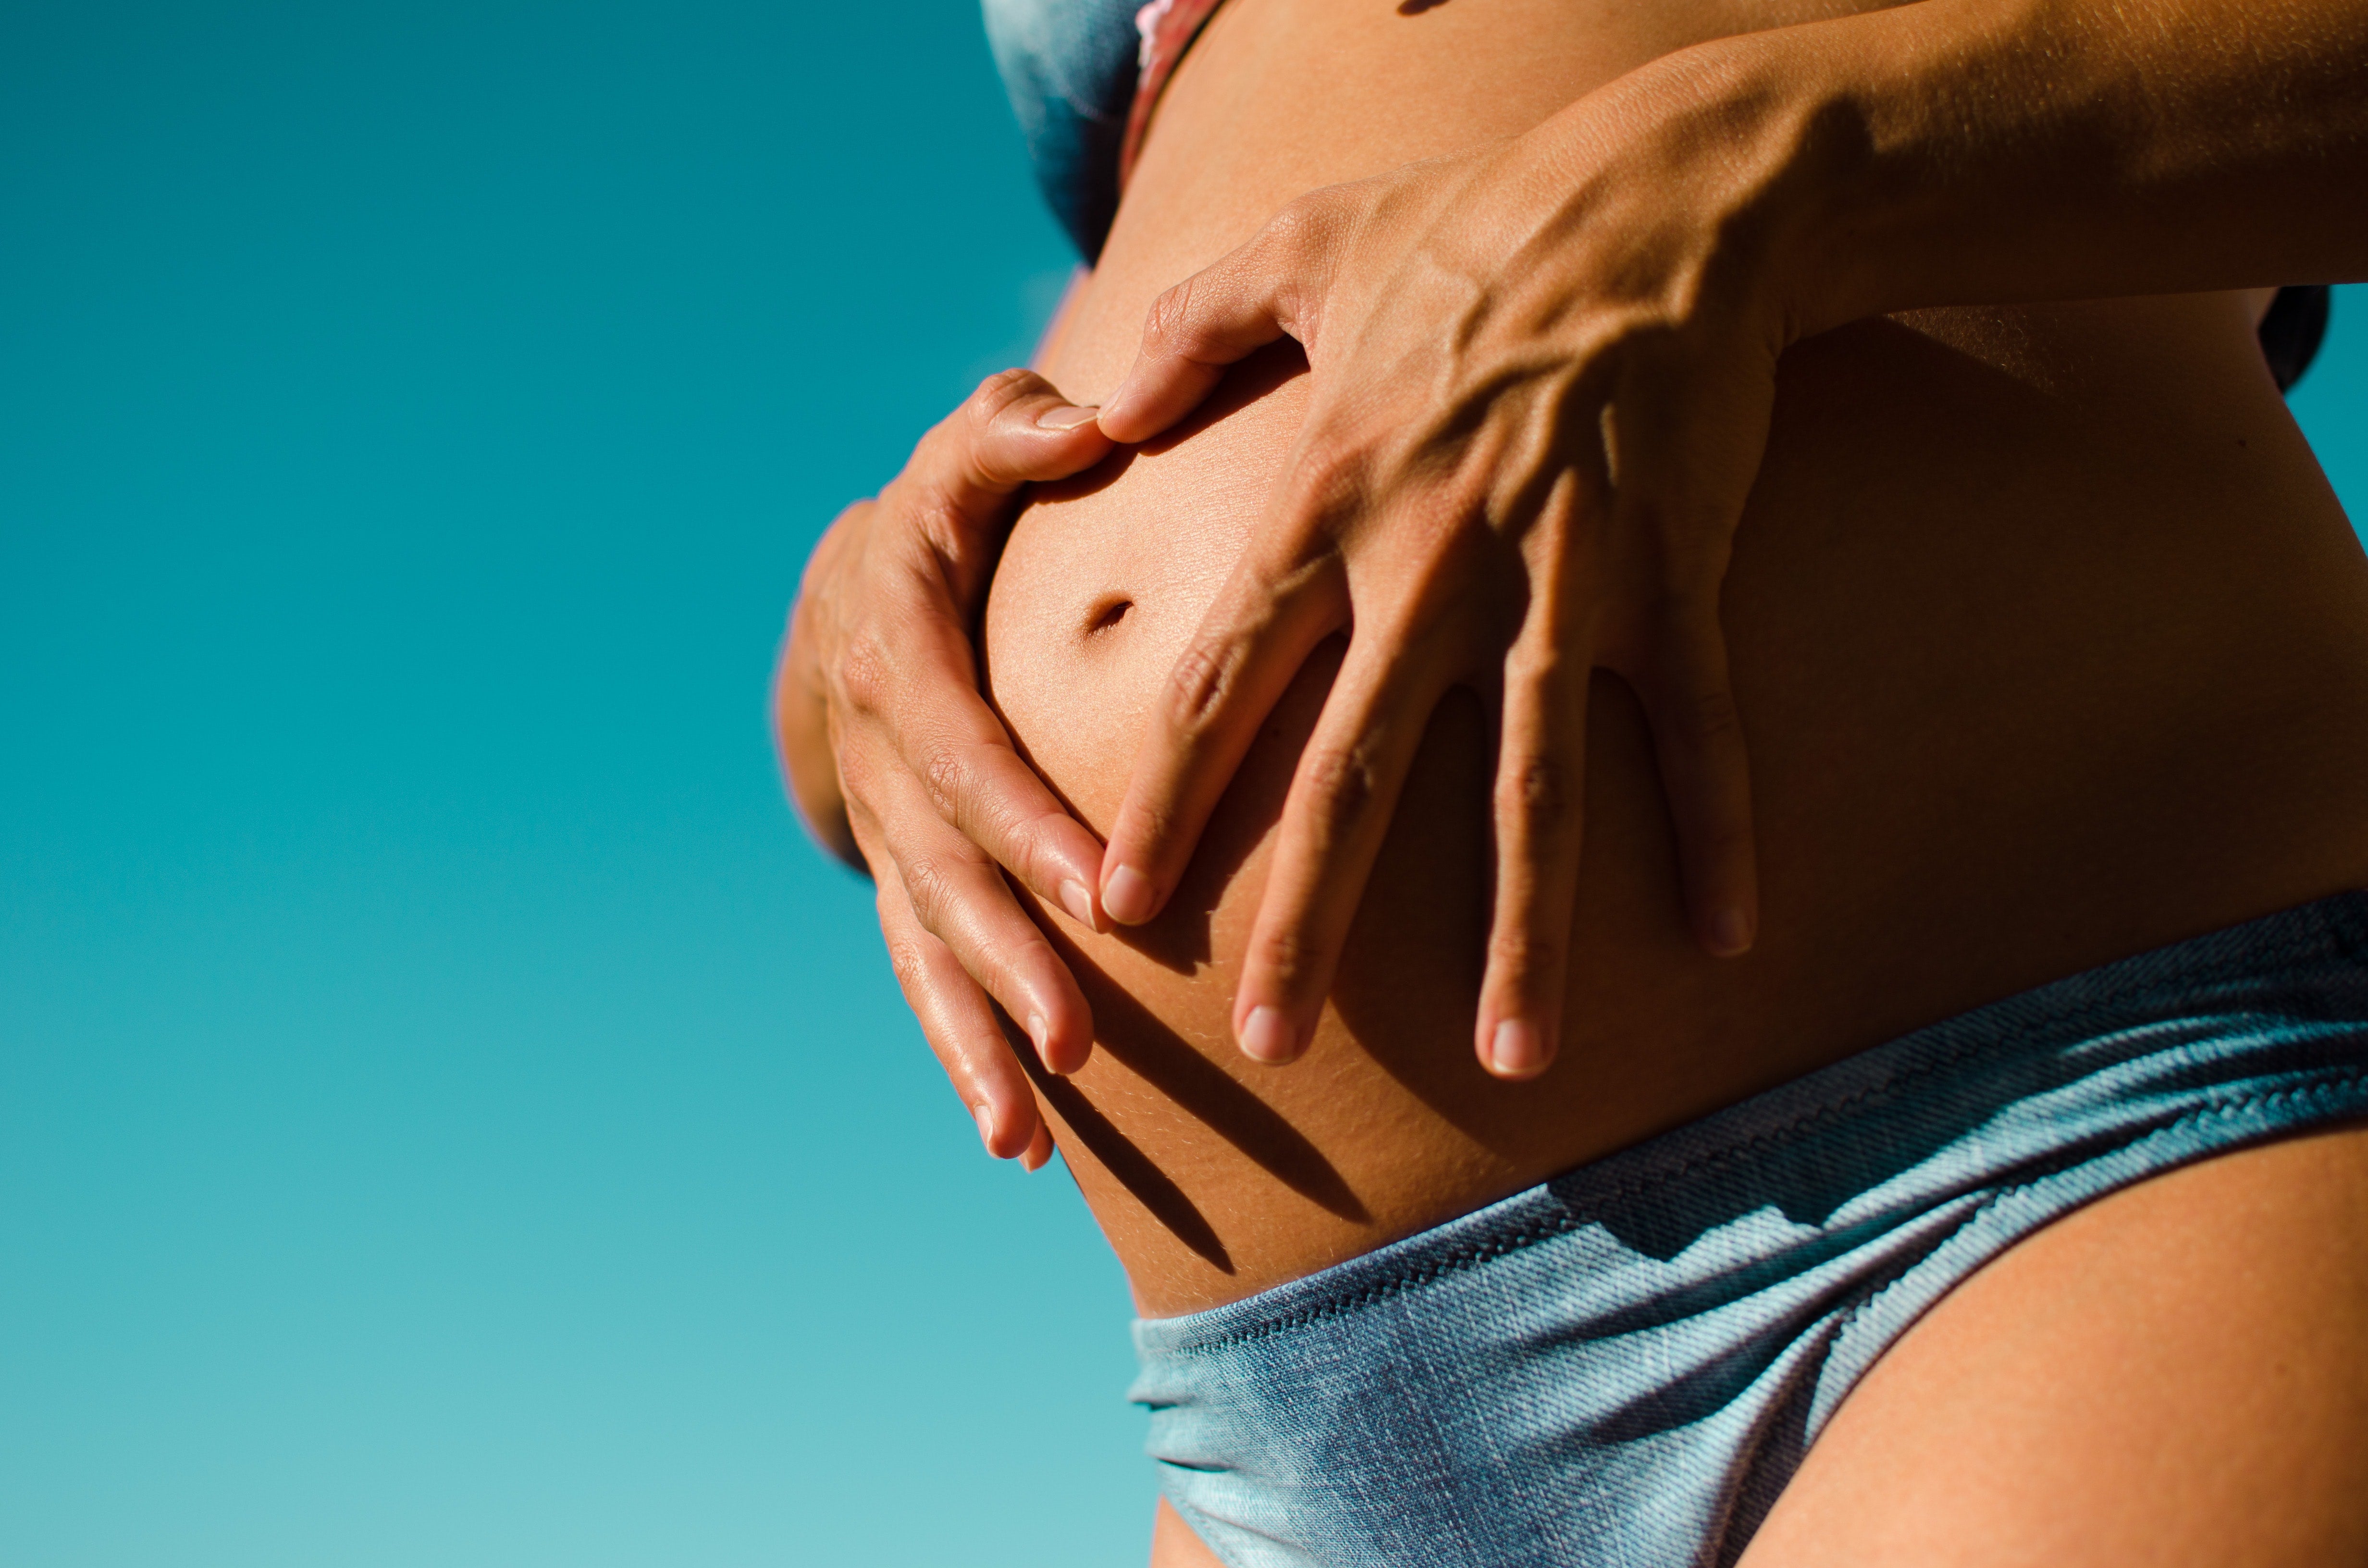 A woman with her partner hands over her pregnant stomach